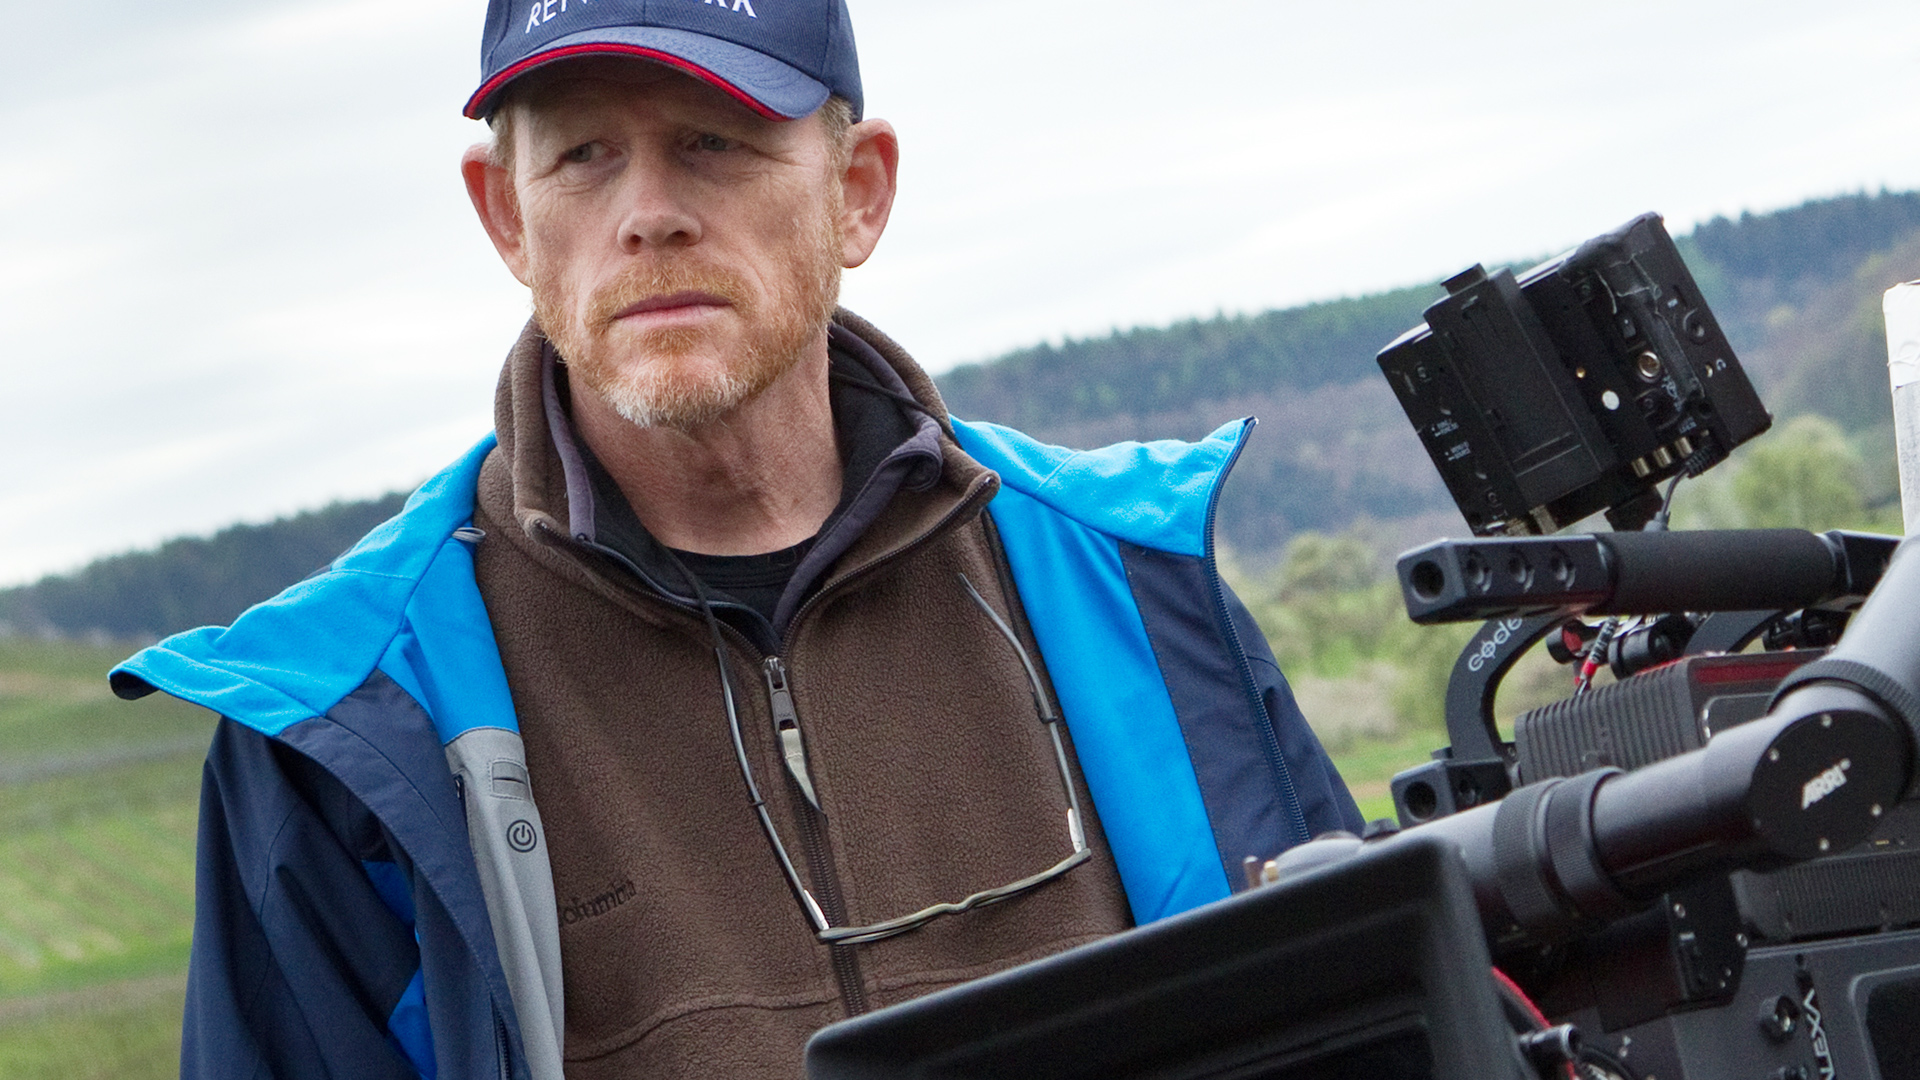 This Just In: Ron Howard to Direct Upcoming ‘Han Solo’ Film